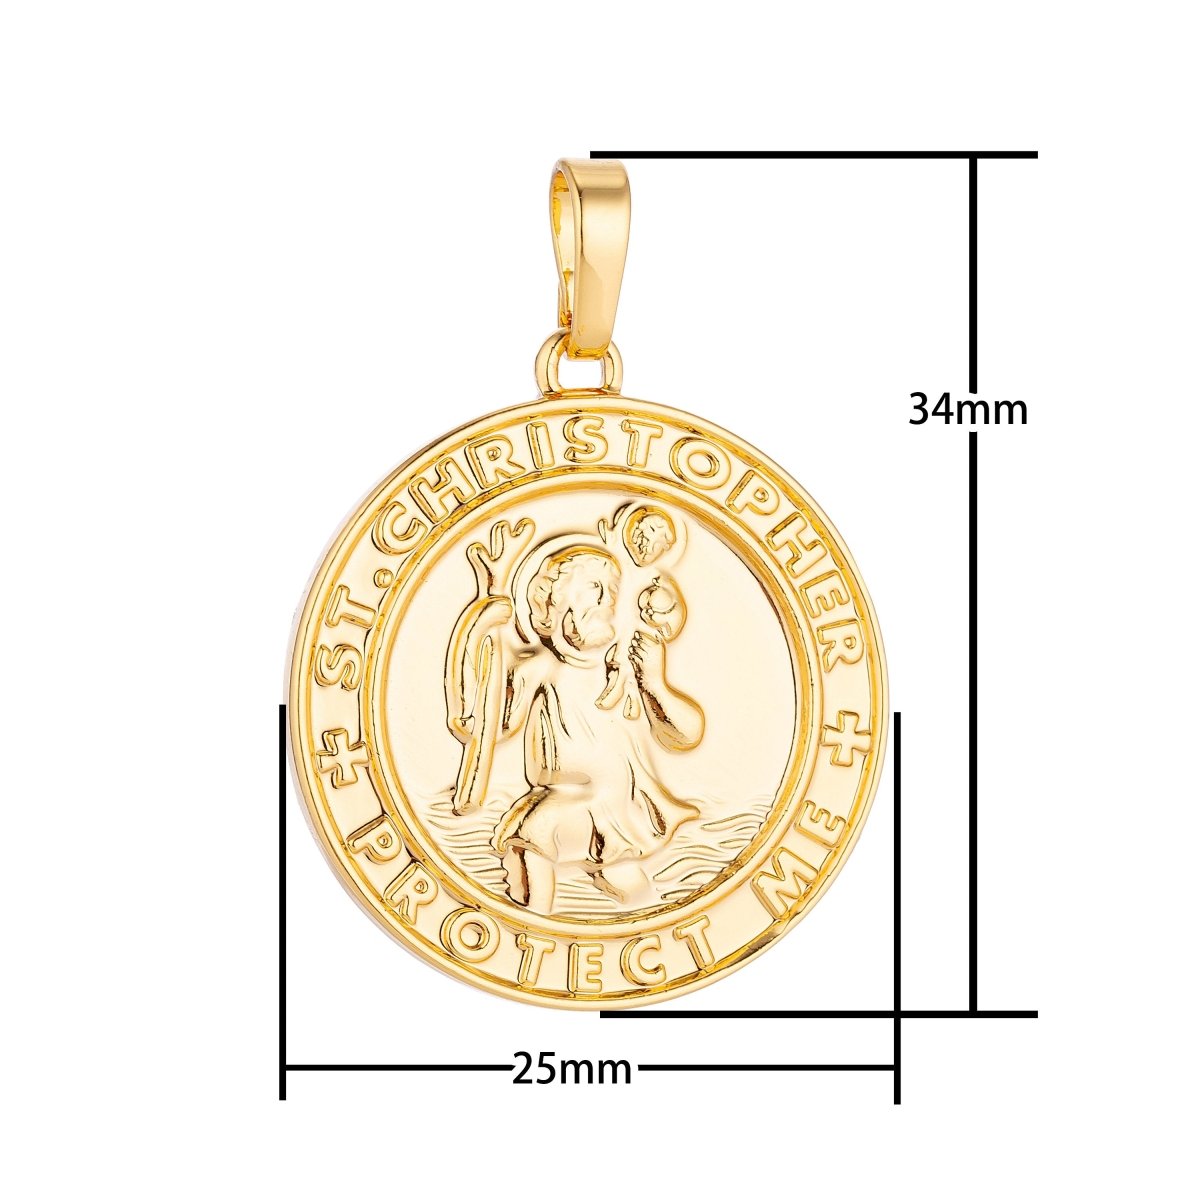 Overstock Pricing 24k Gold Filled Saint Christopher Medal Pendant for Protection Protect us Religious Amulet charm for Necklace Jewelry Making H-213 - DLUXCA